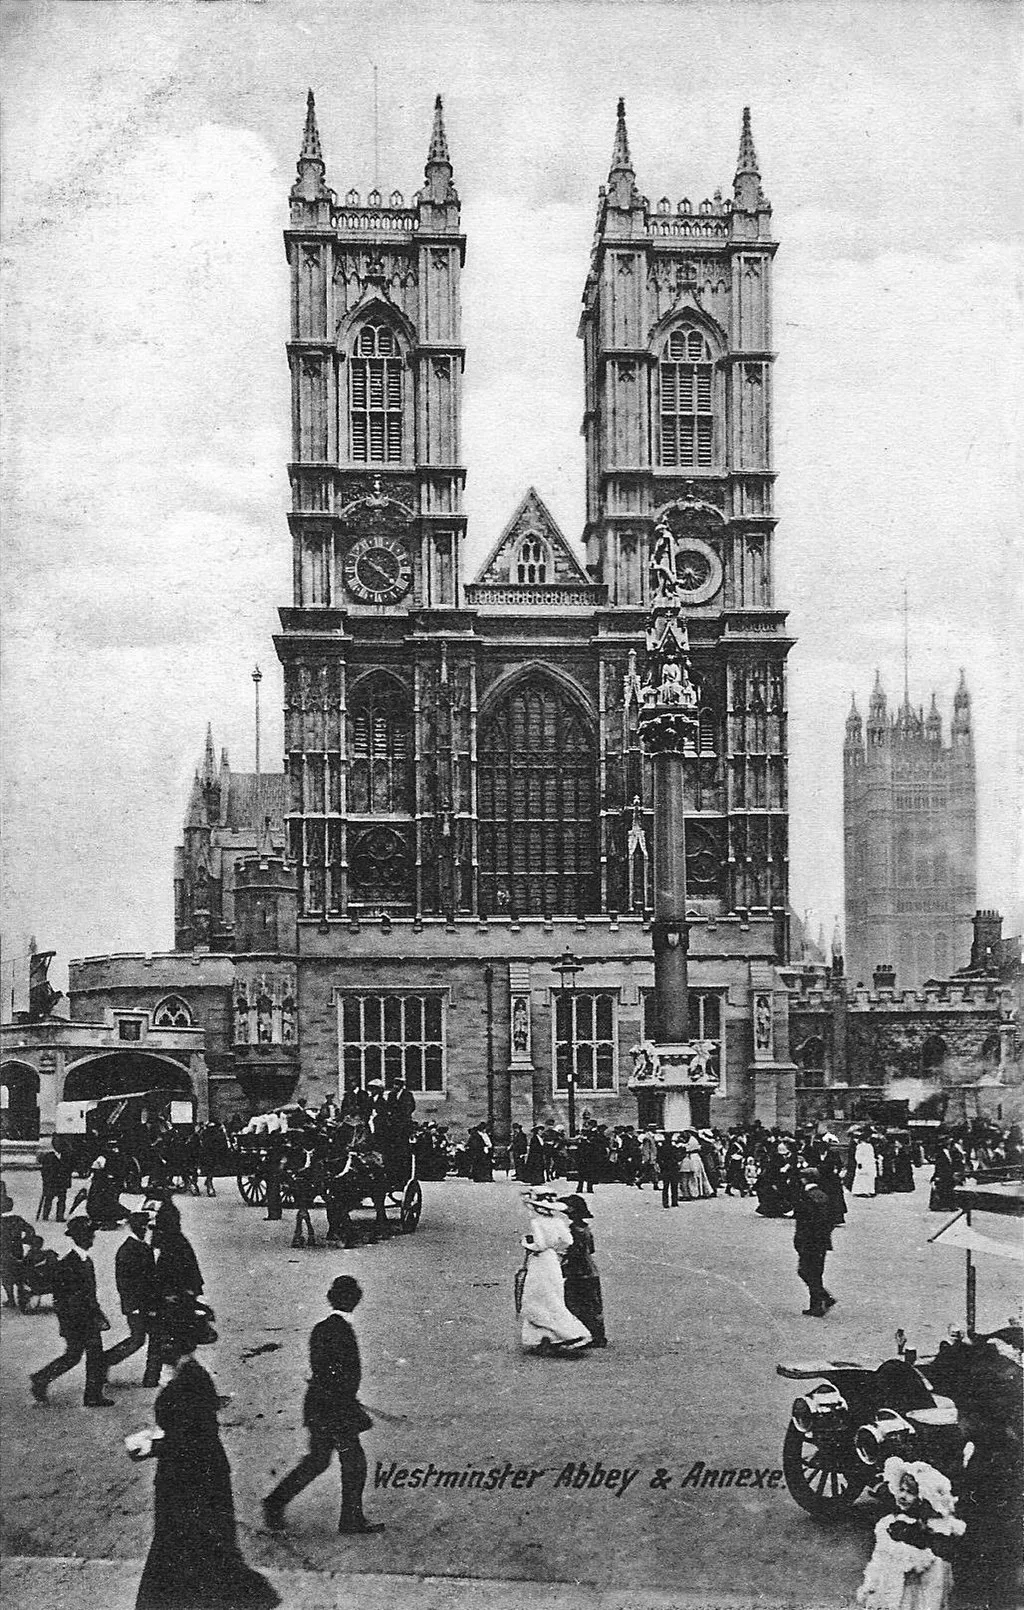 View of Westminster Abbey in 1911, featuring the temporary annex built for George V's coronation